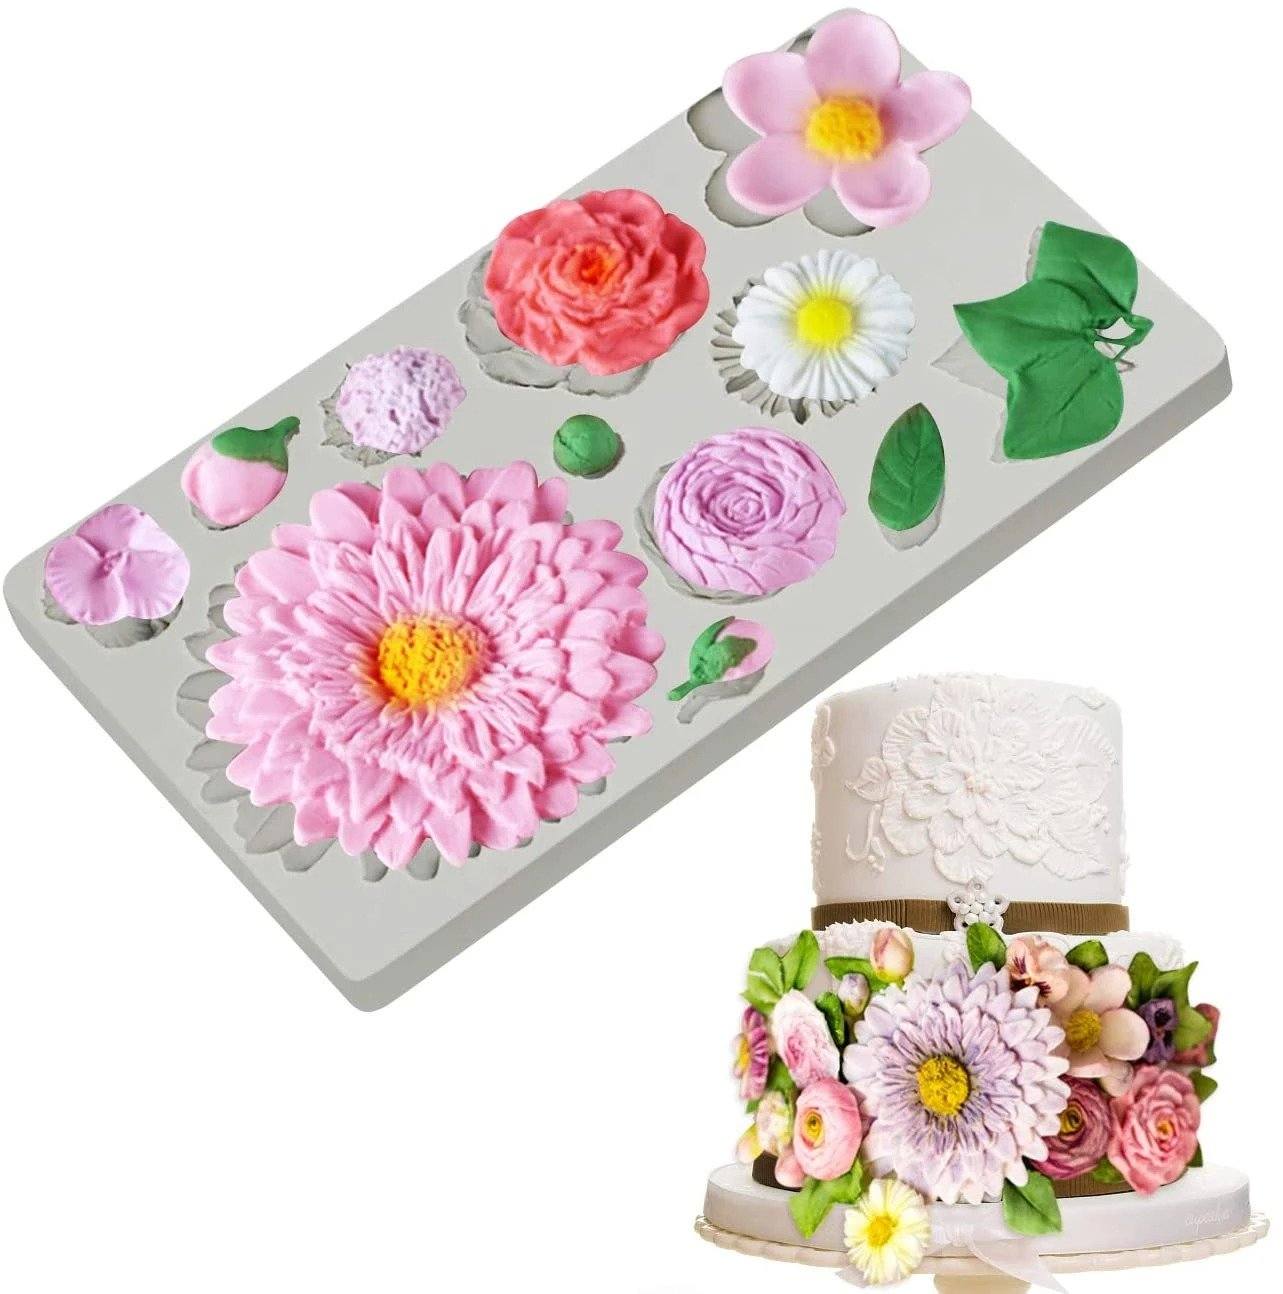 Big Flowers With Leaves Silicone Fondant & Chocolate Mold